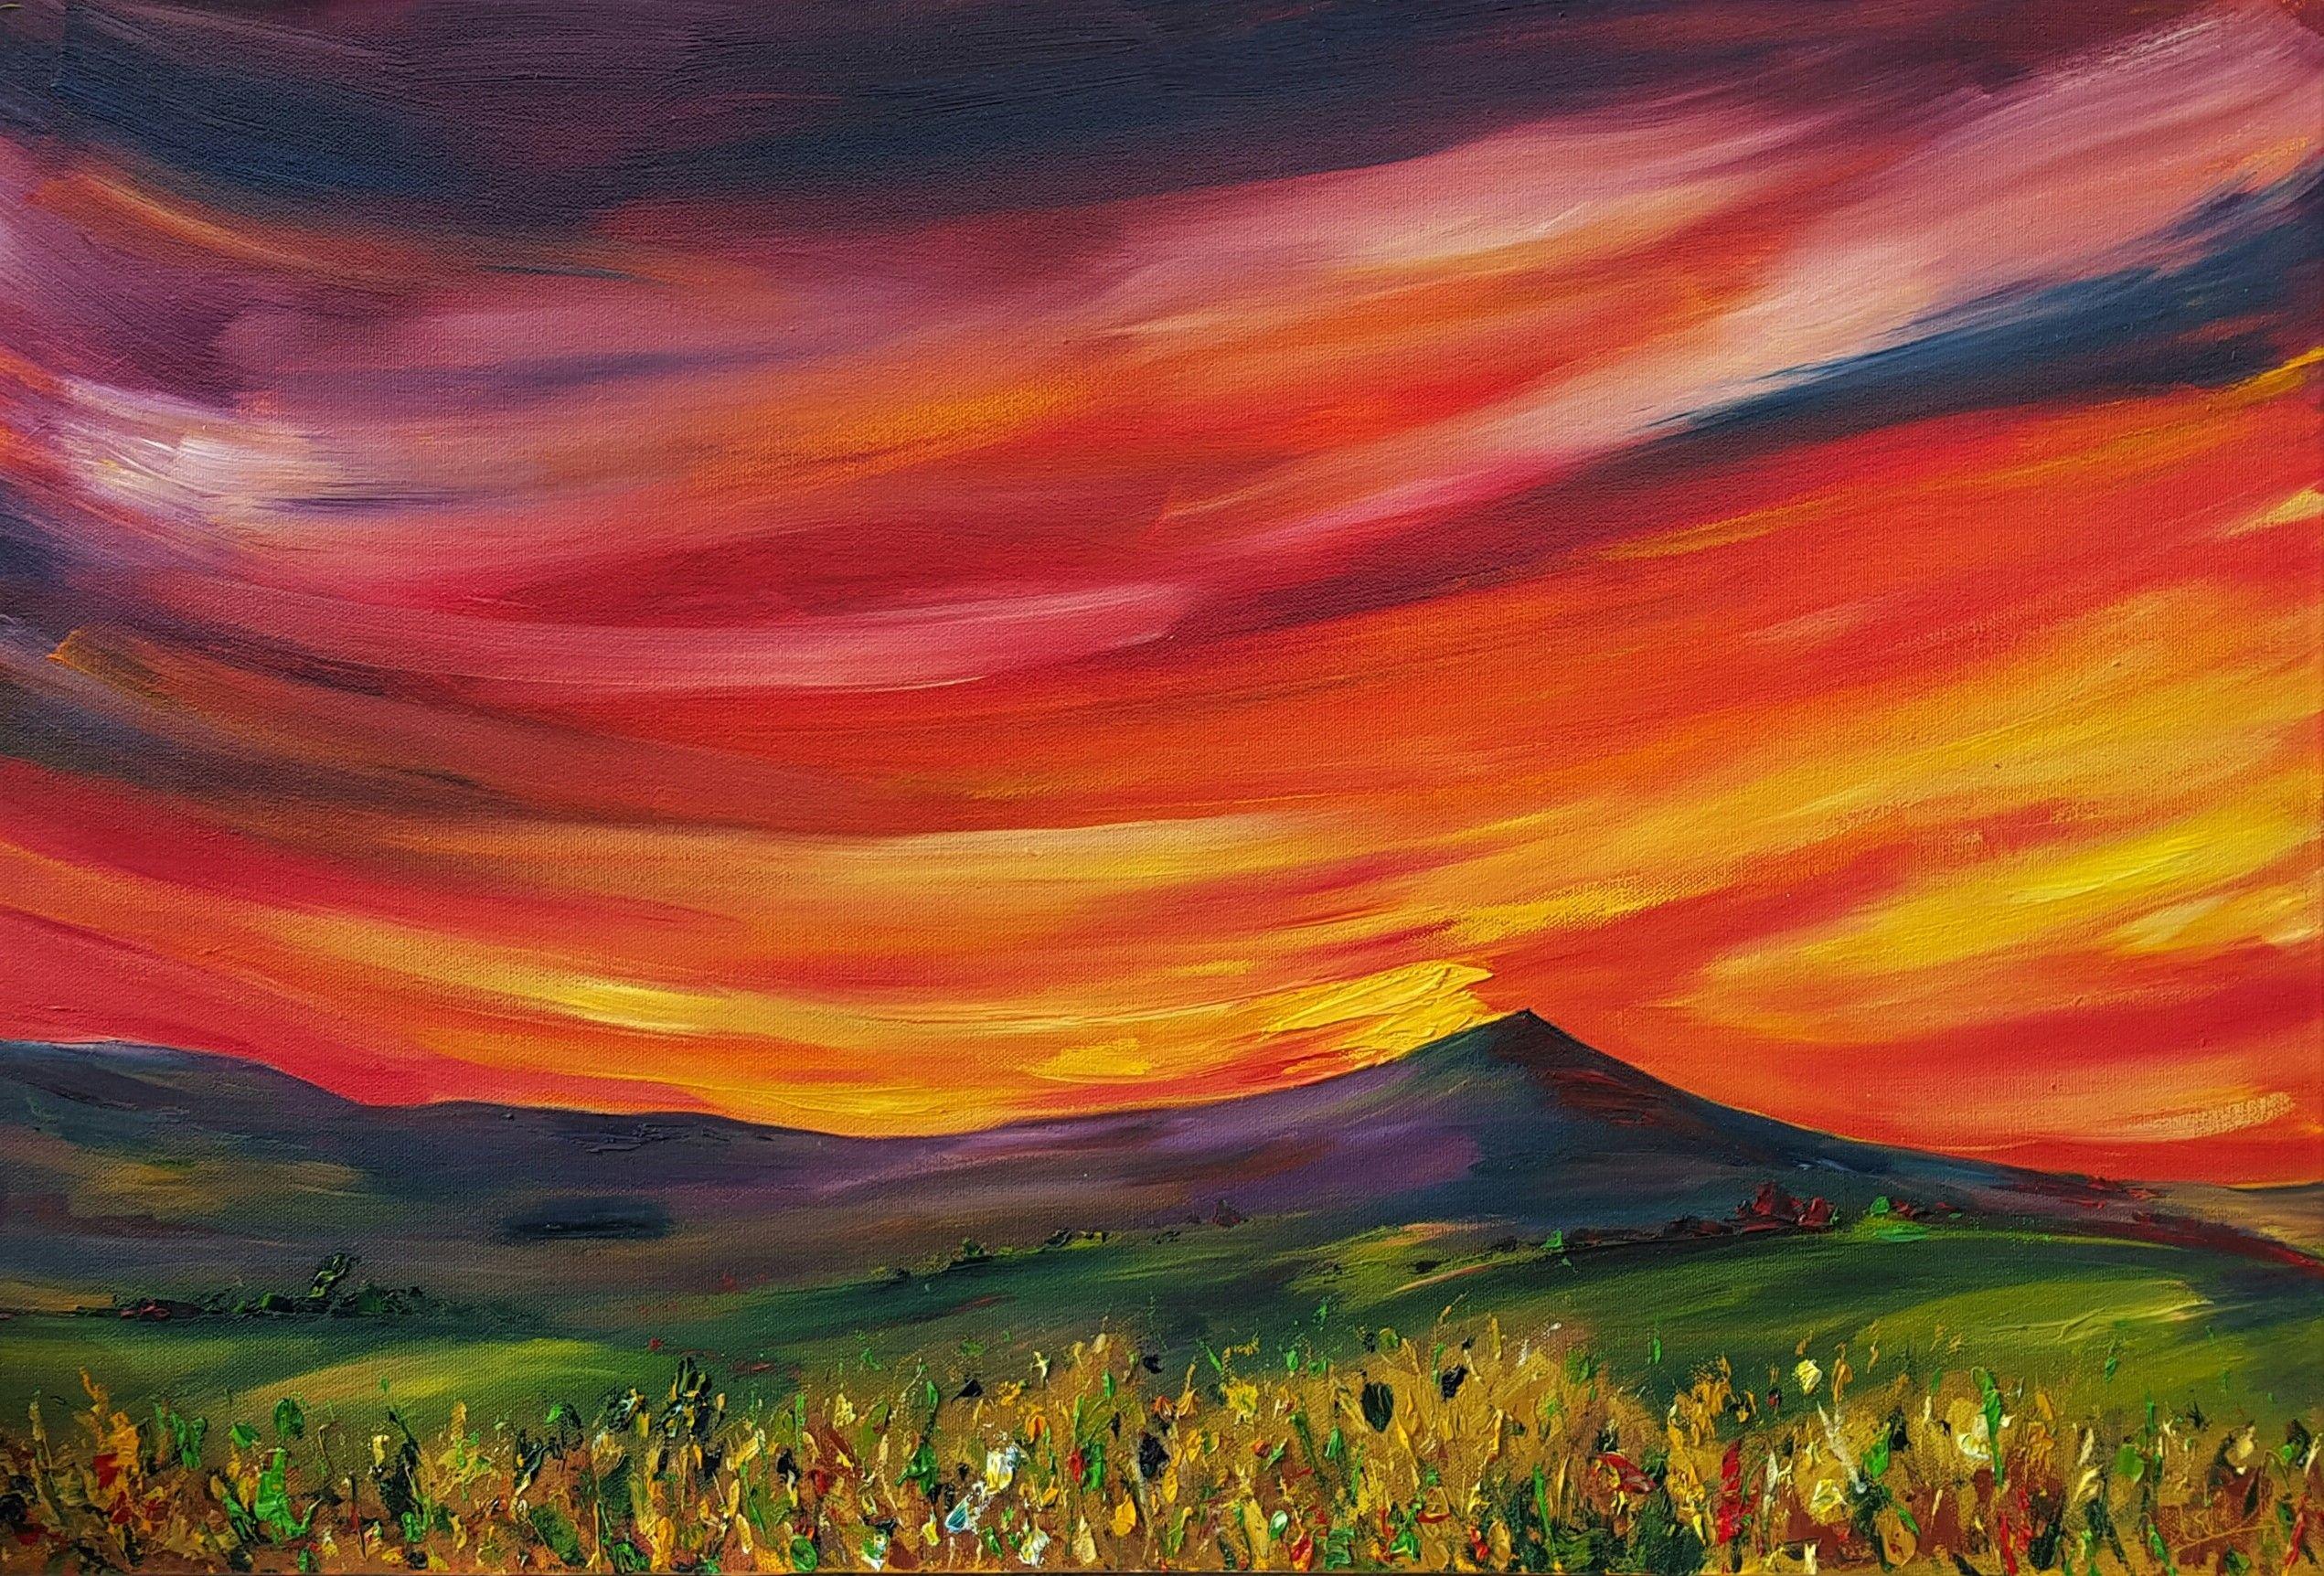 The Red red skies of Sunset is filled with the vivid colours of a vibrant sunset - it seemed like the whole sky was alight with flaming oranges and firey reds, making the landscape dramatic and epic..  The shape and slopes of Croghan Mountain on the